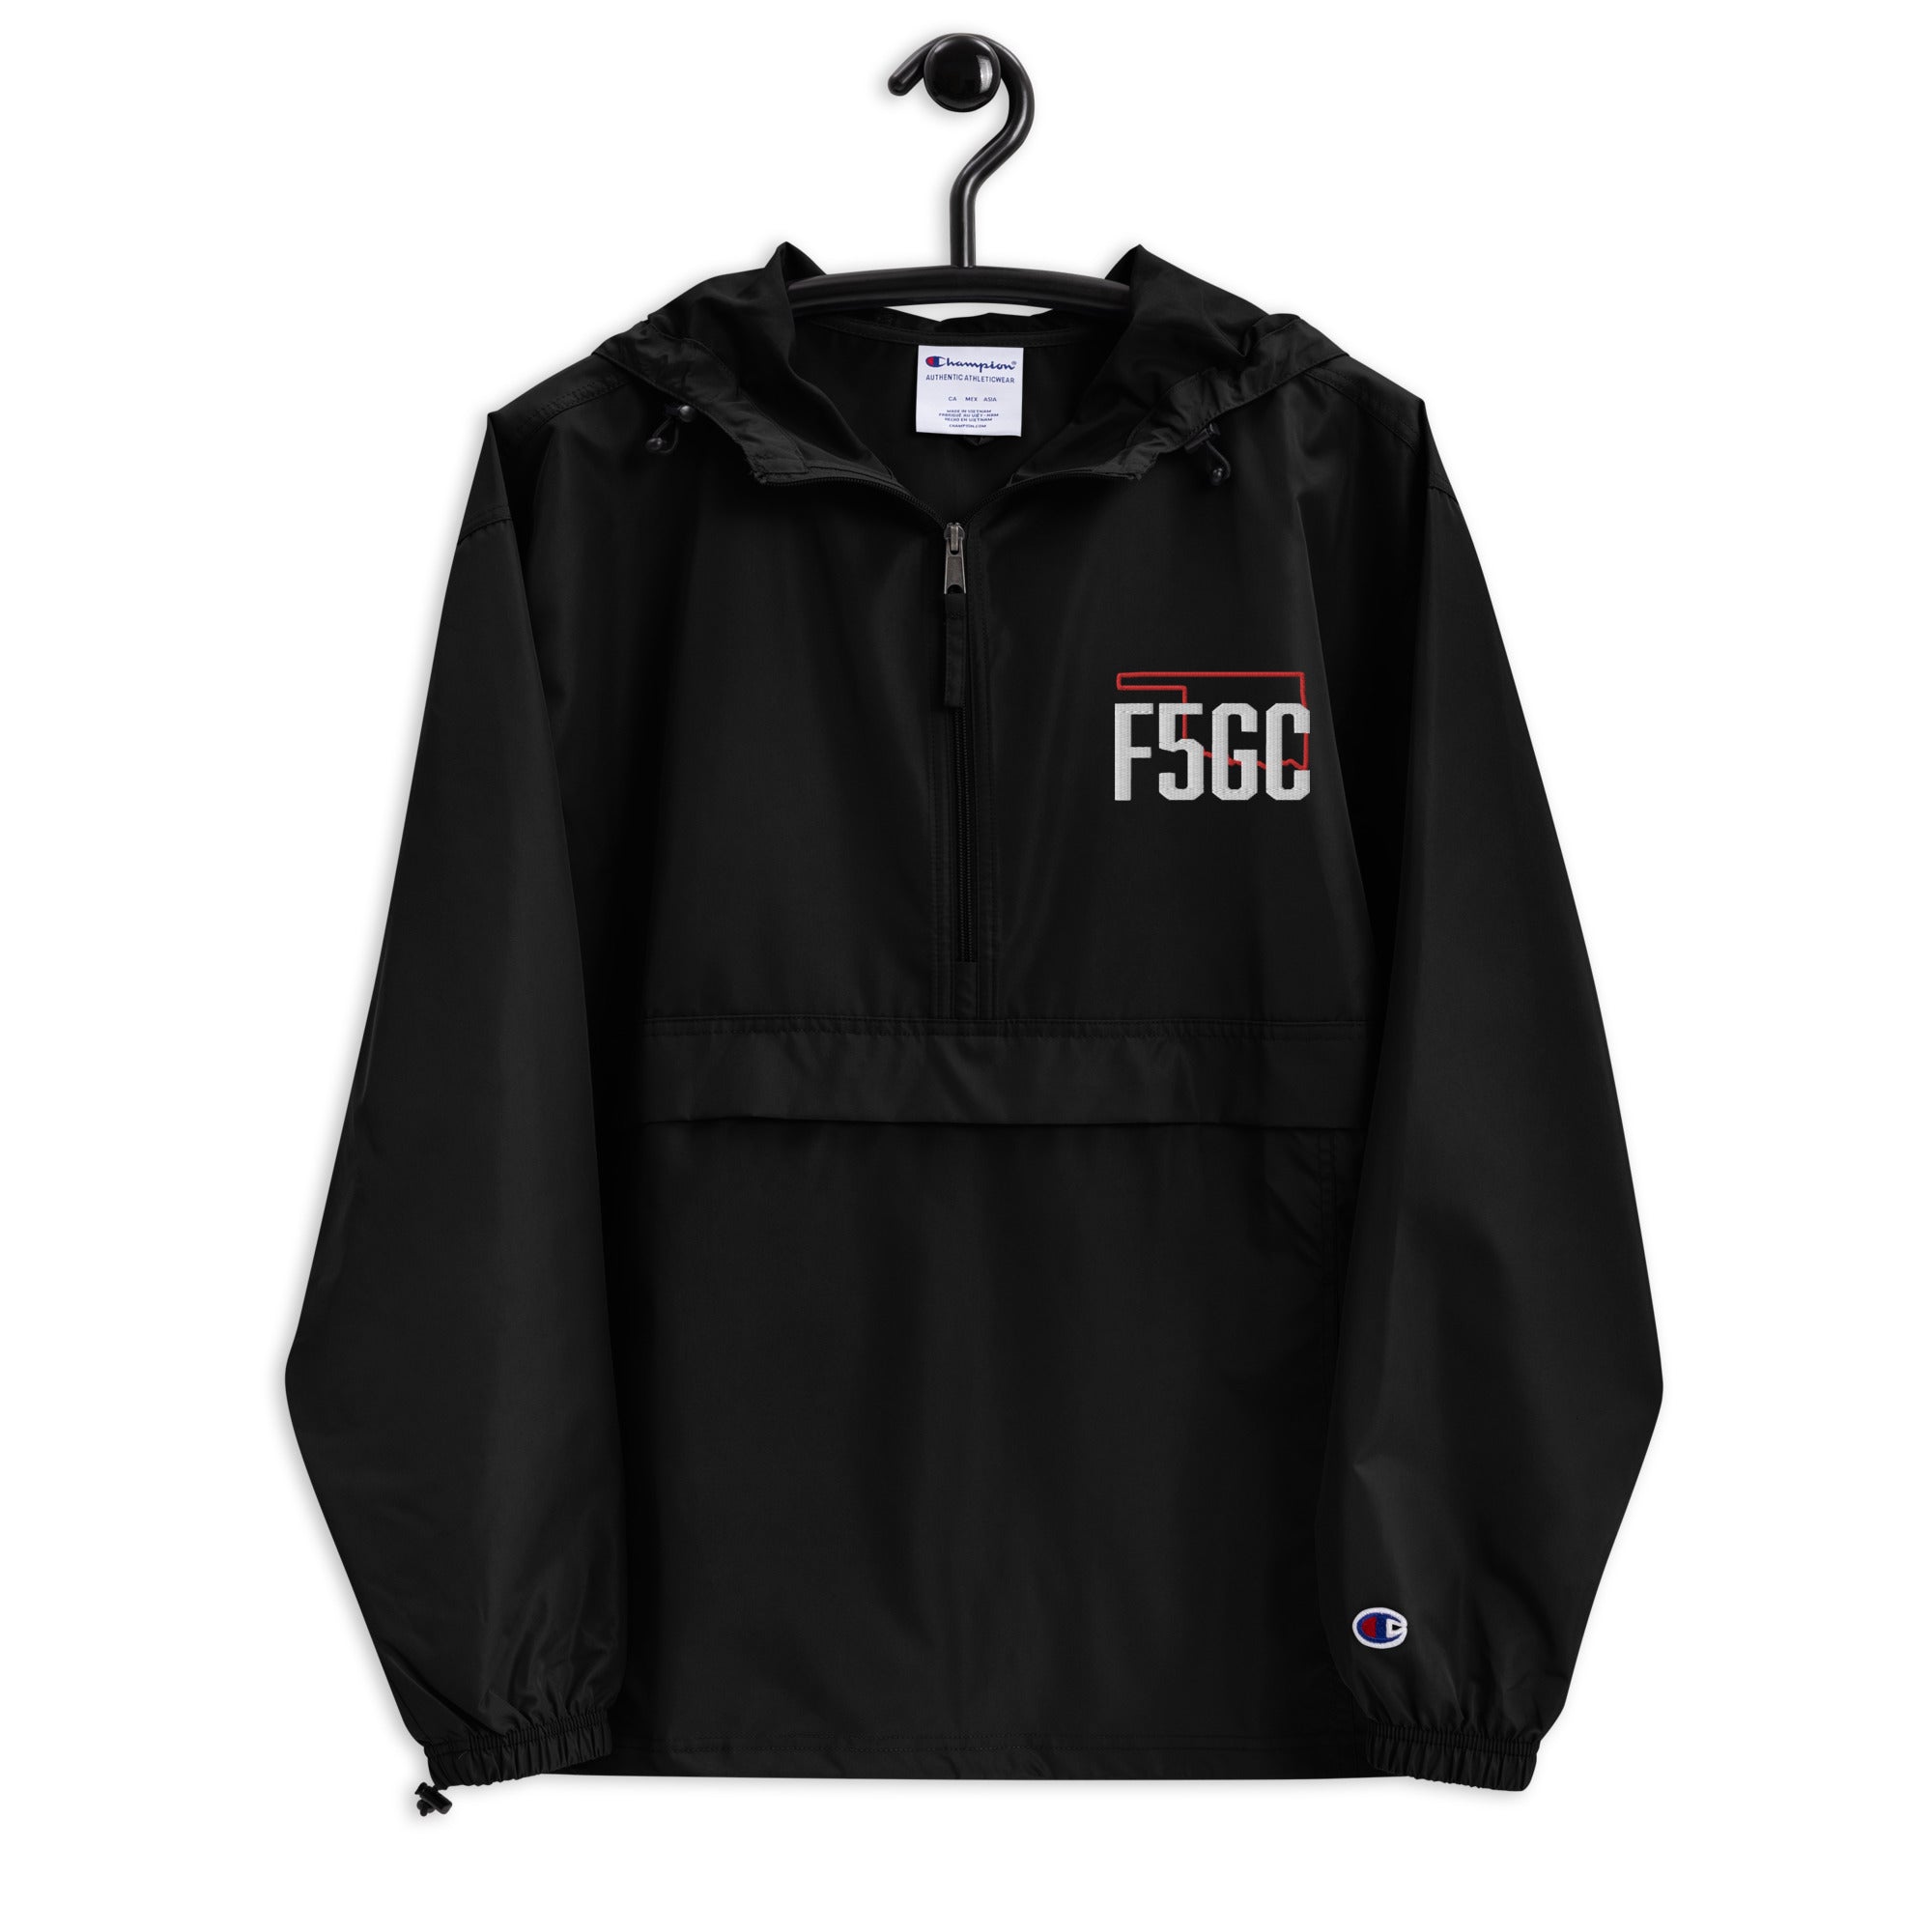 F5GC Embroidered Champion Packable Jacket